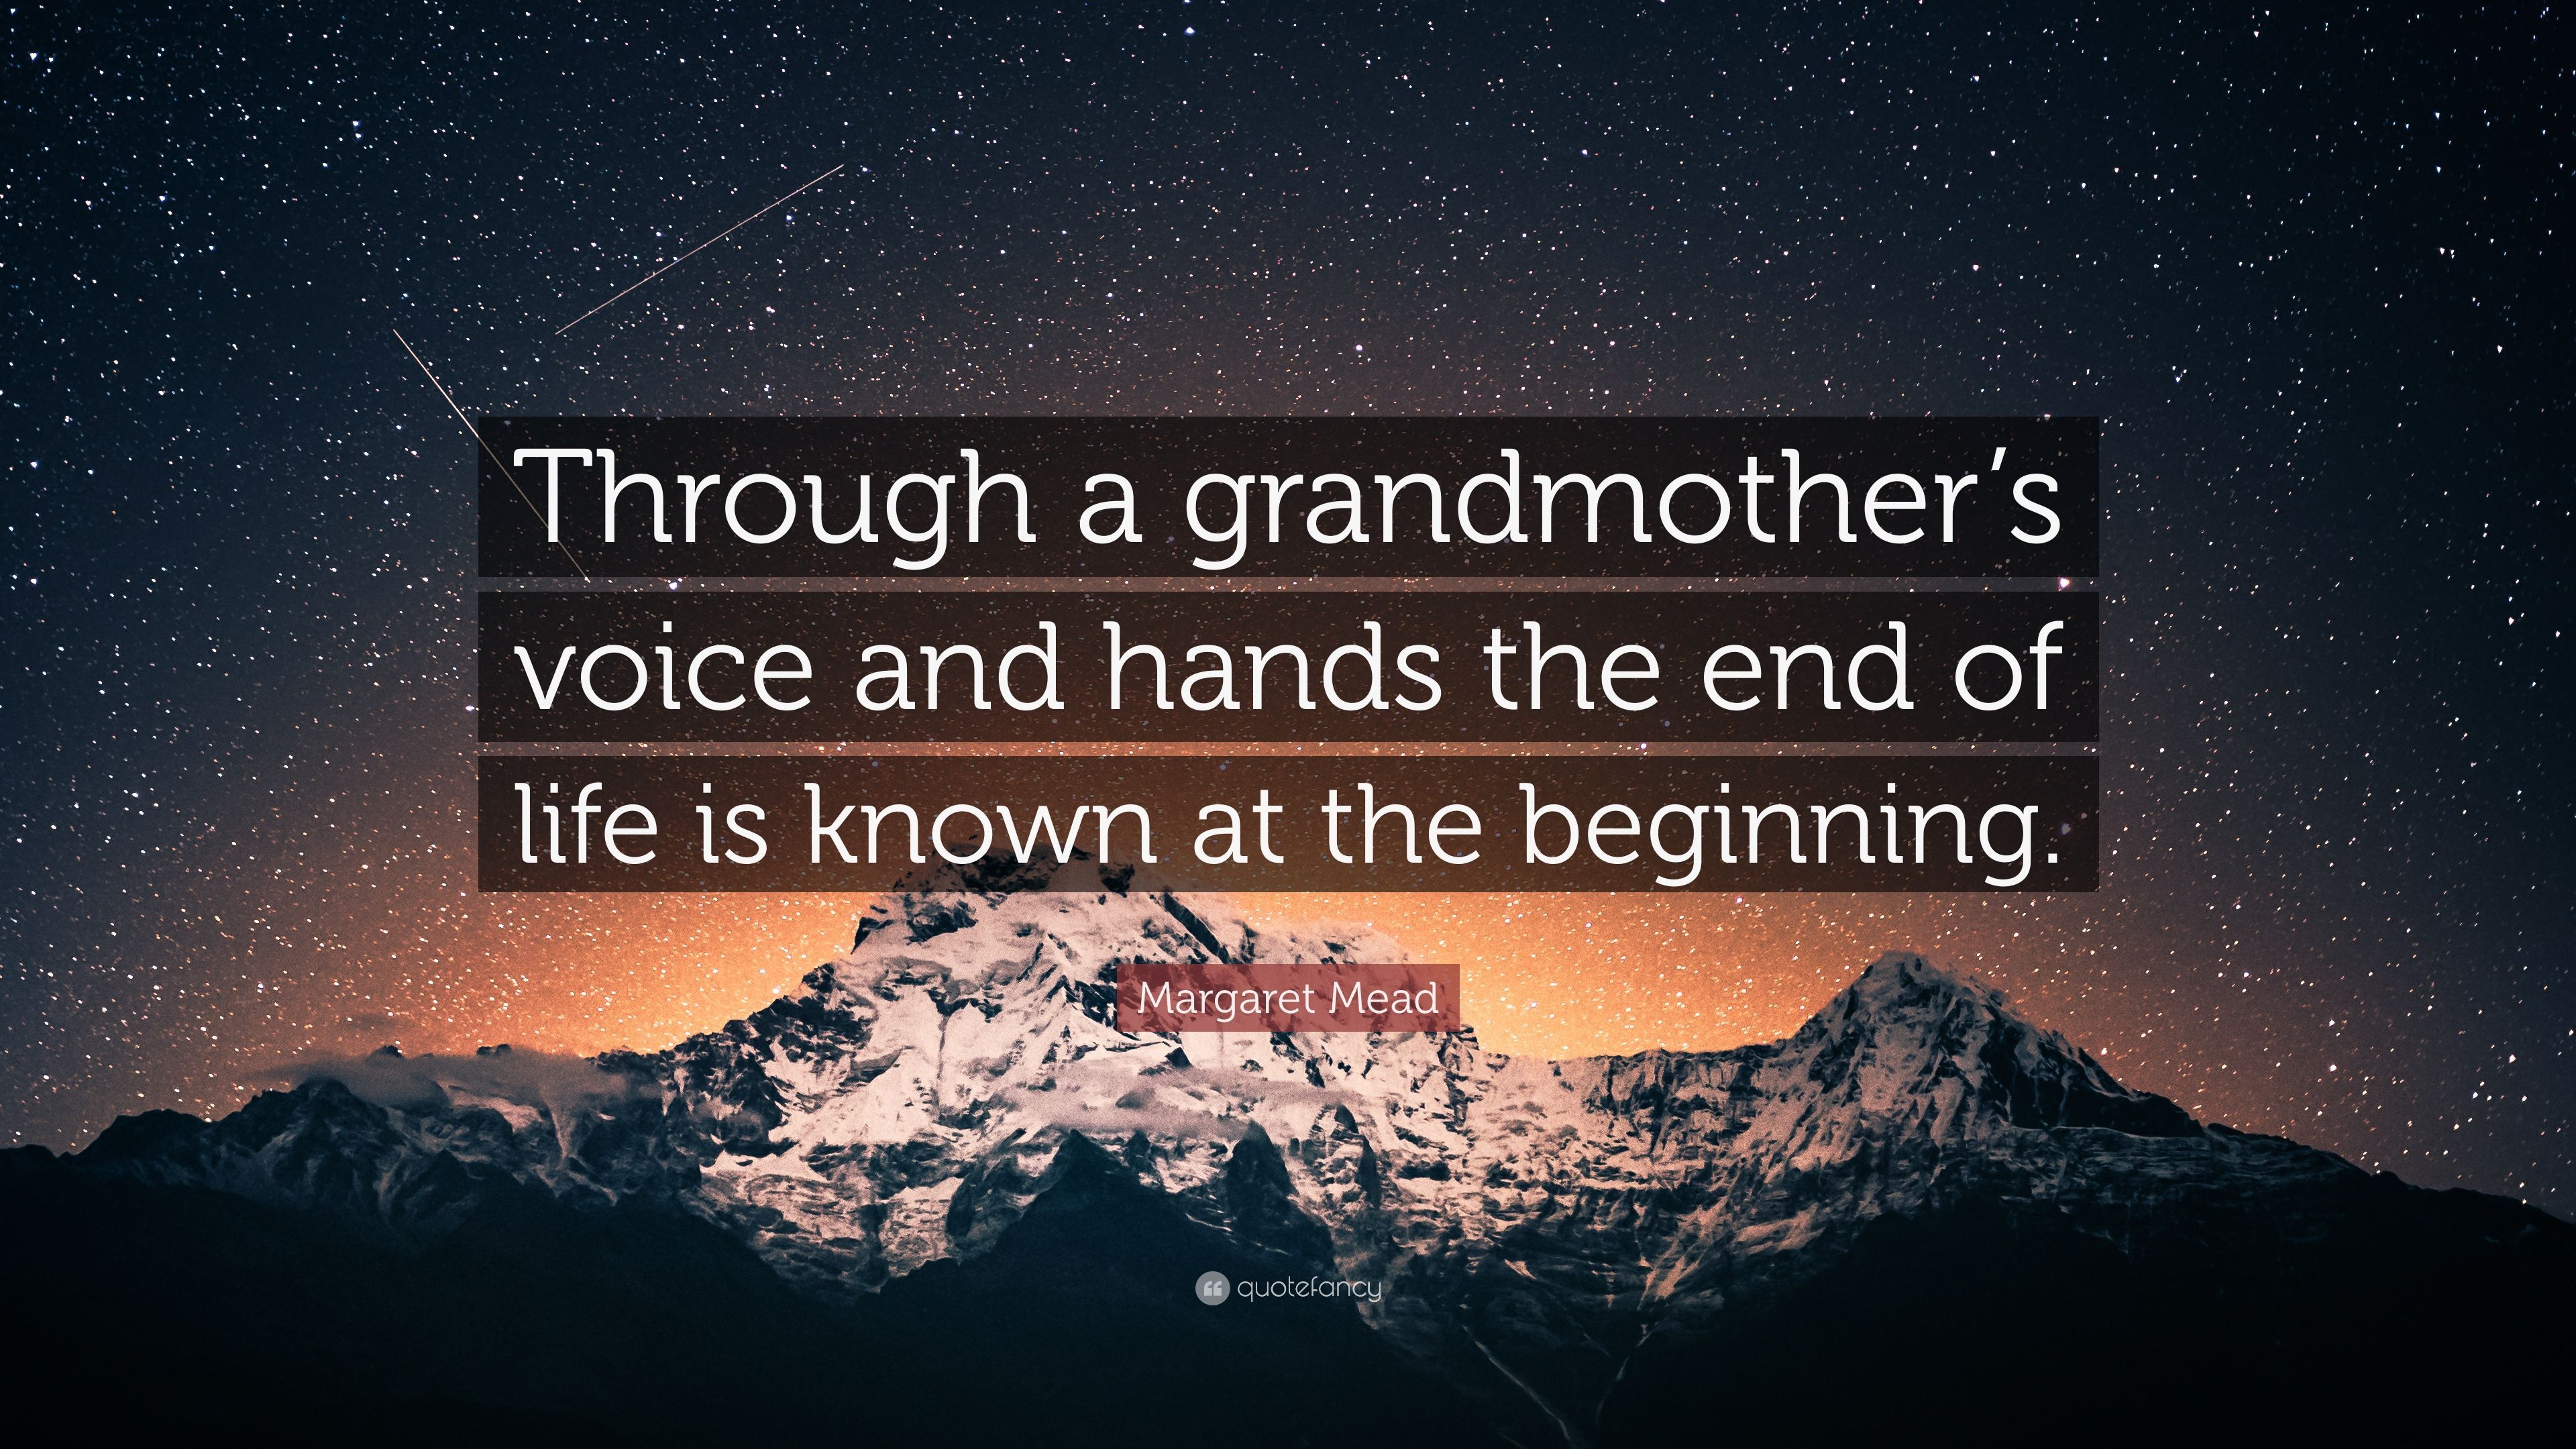 Margaret Mead Quote: “Through a grandmother's voice and hands the end of life is known at the beginning.” (7 wallpaper)